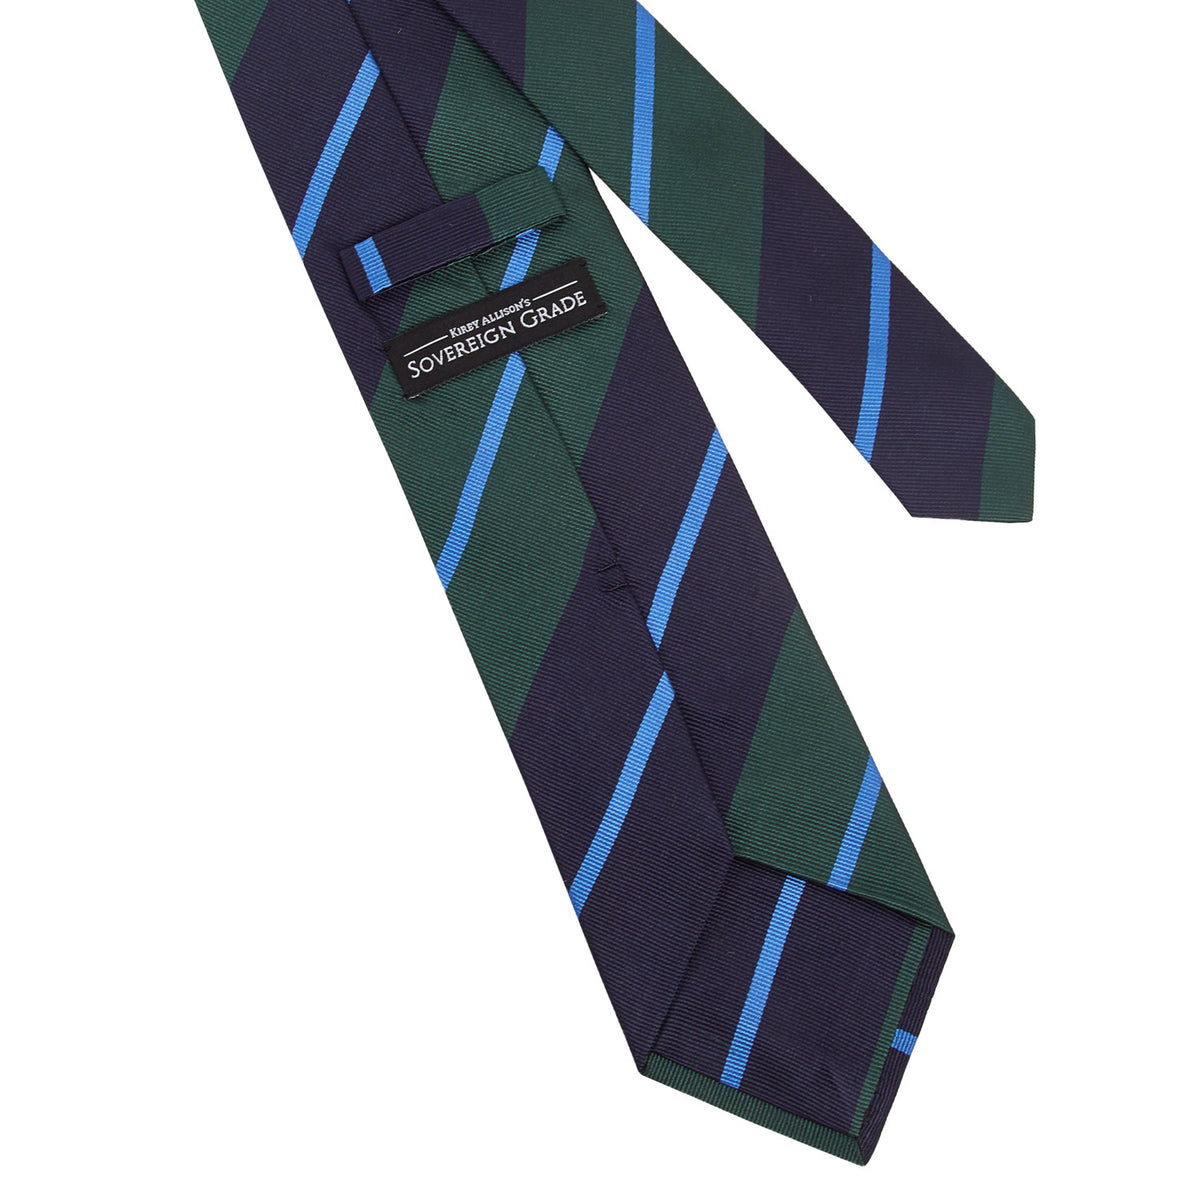 A Sovereign Grade Navy/Green Rep Tie by KirbyAllison.com, a handmade green and blue striped tie on a white background of the highest quality.